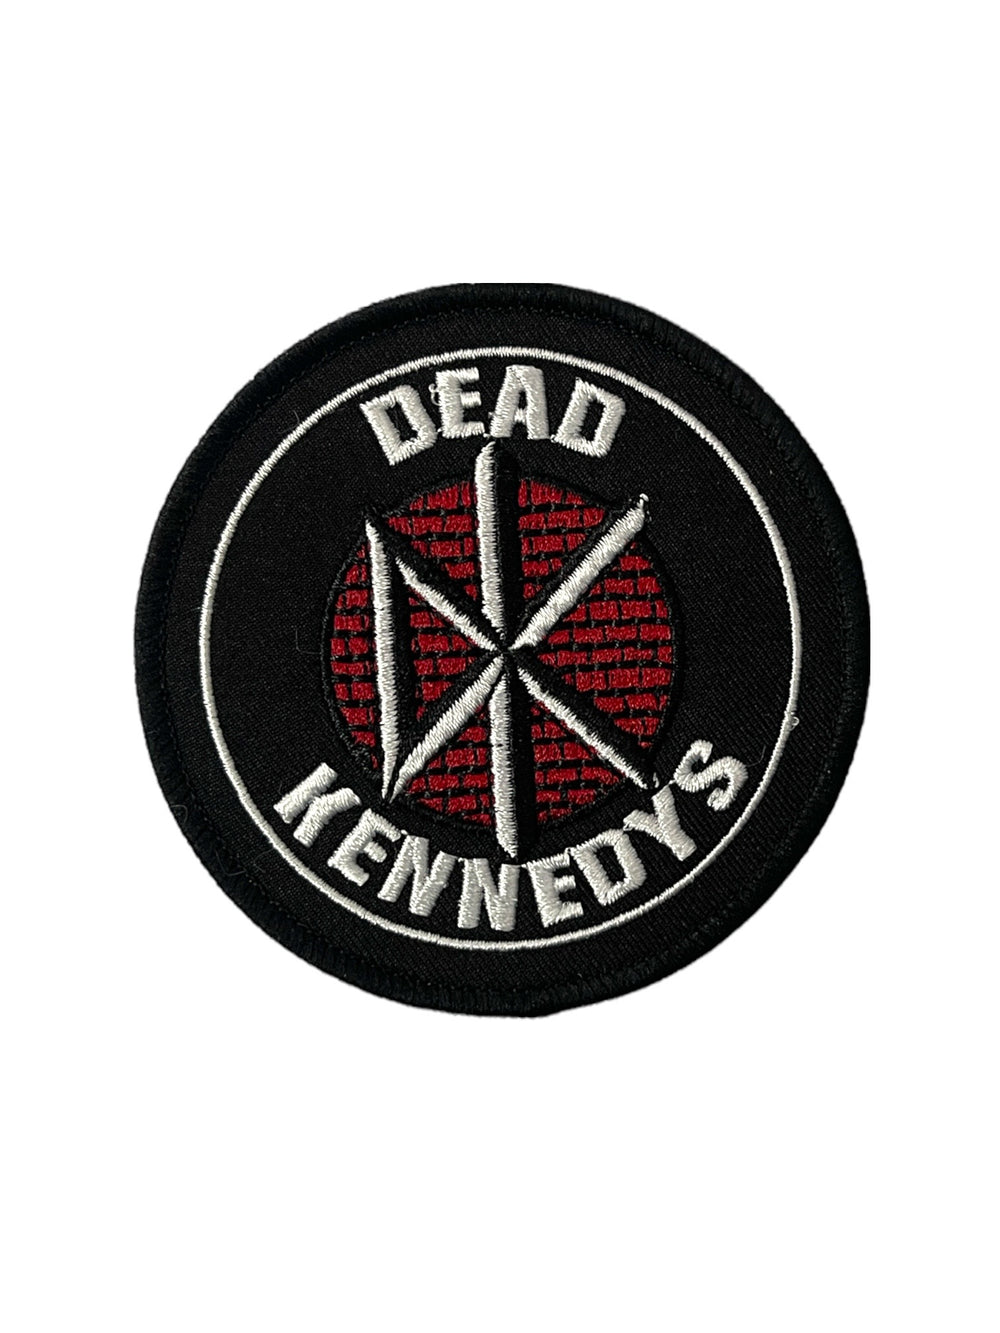 Dead Kennedys Logo Name Round Official Woven Patch Brand New